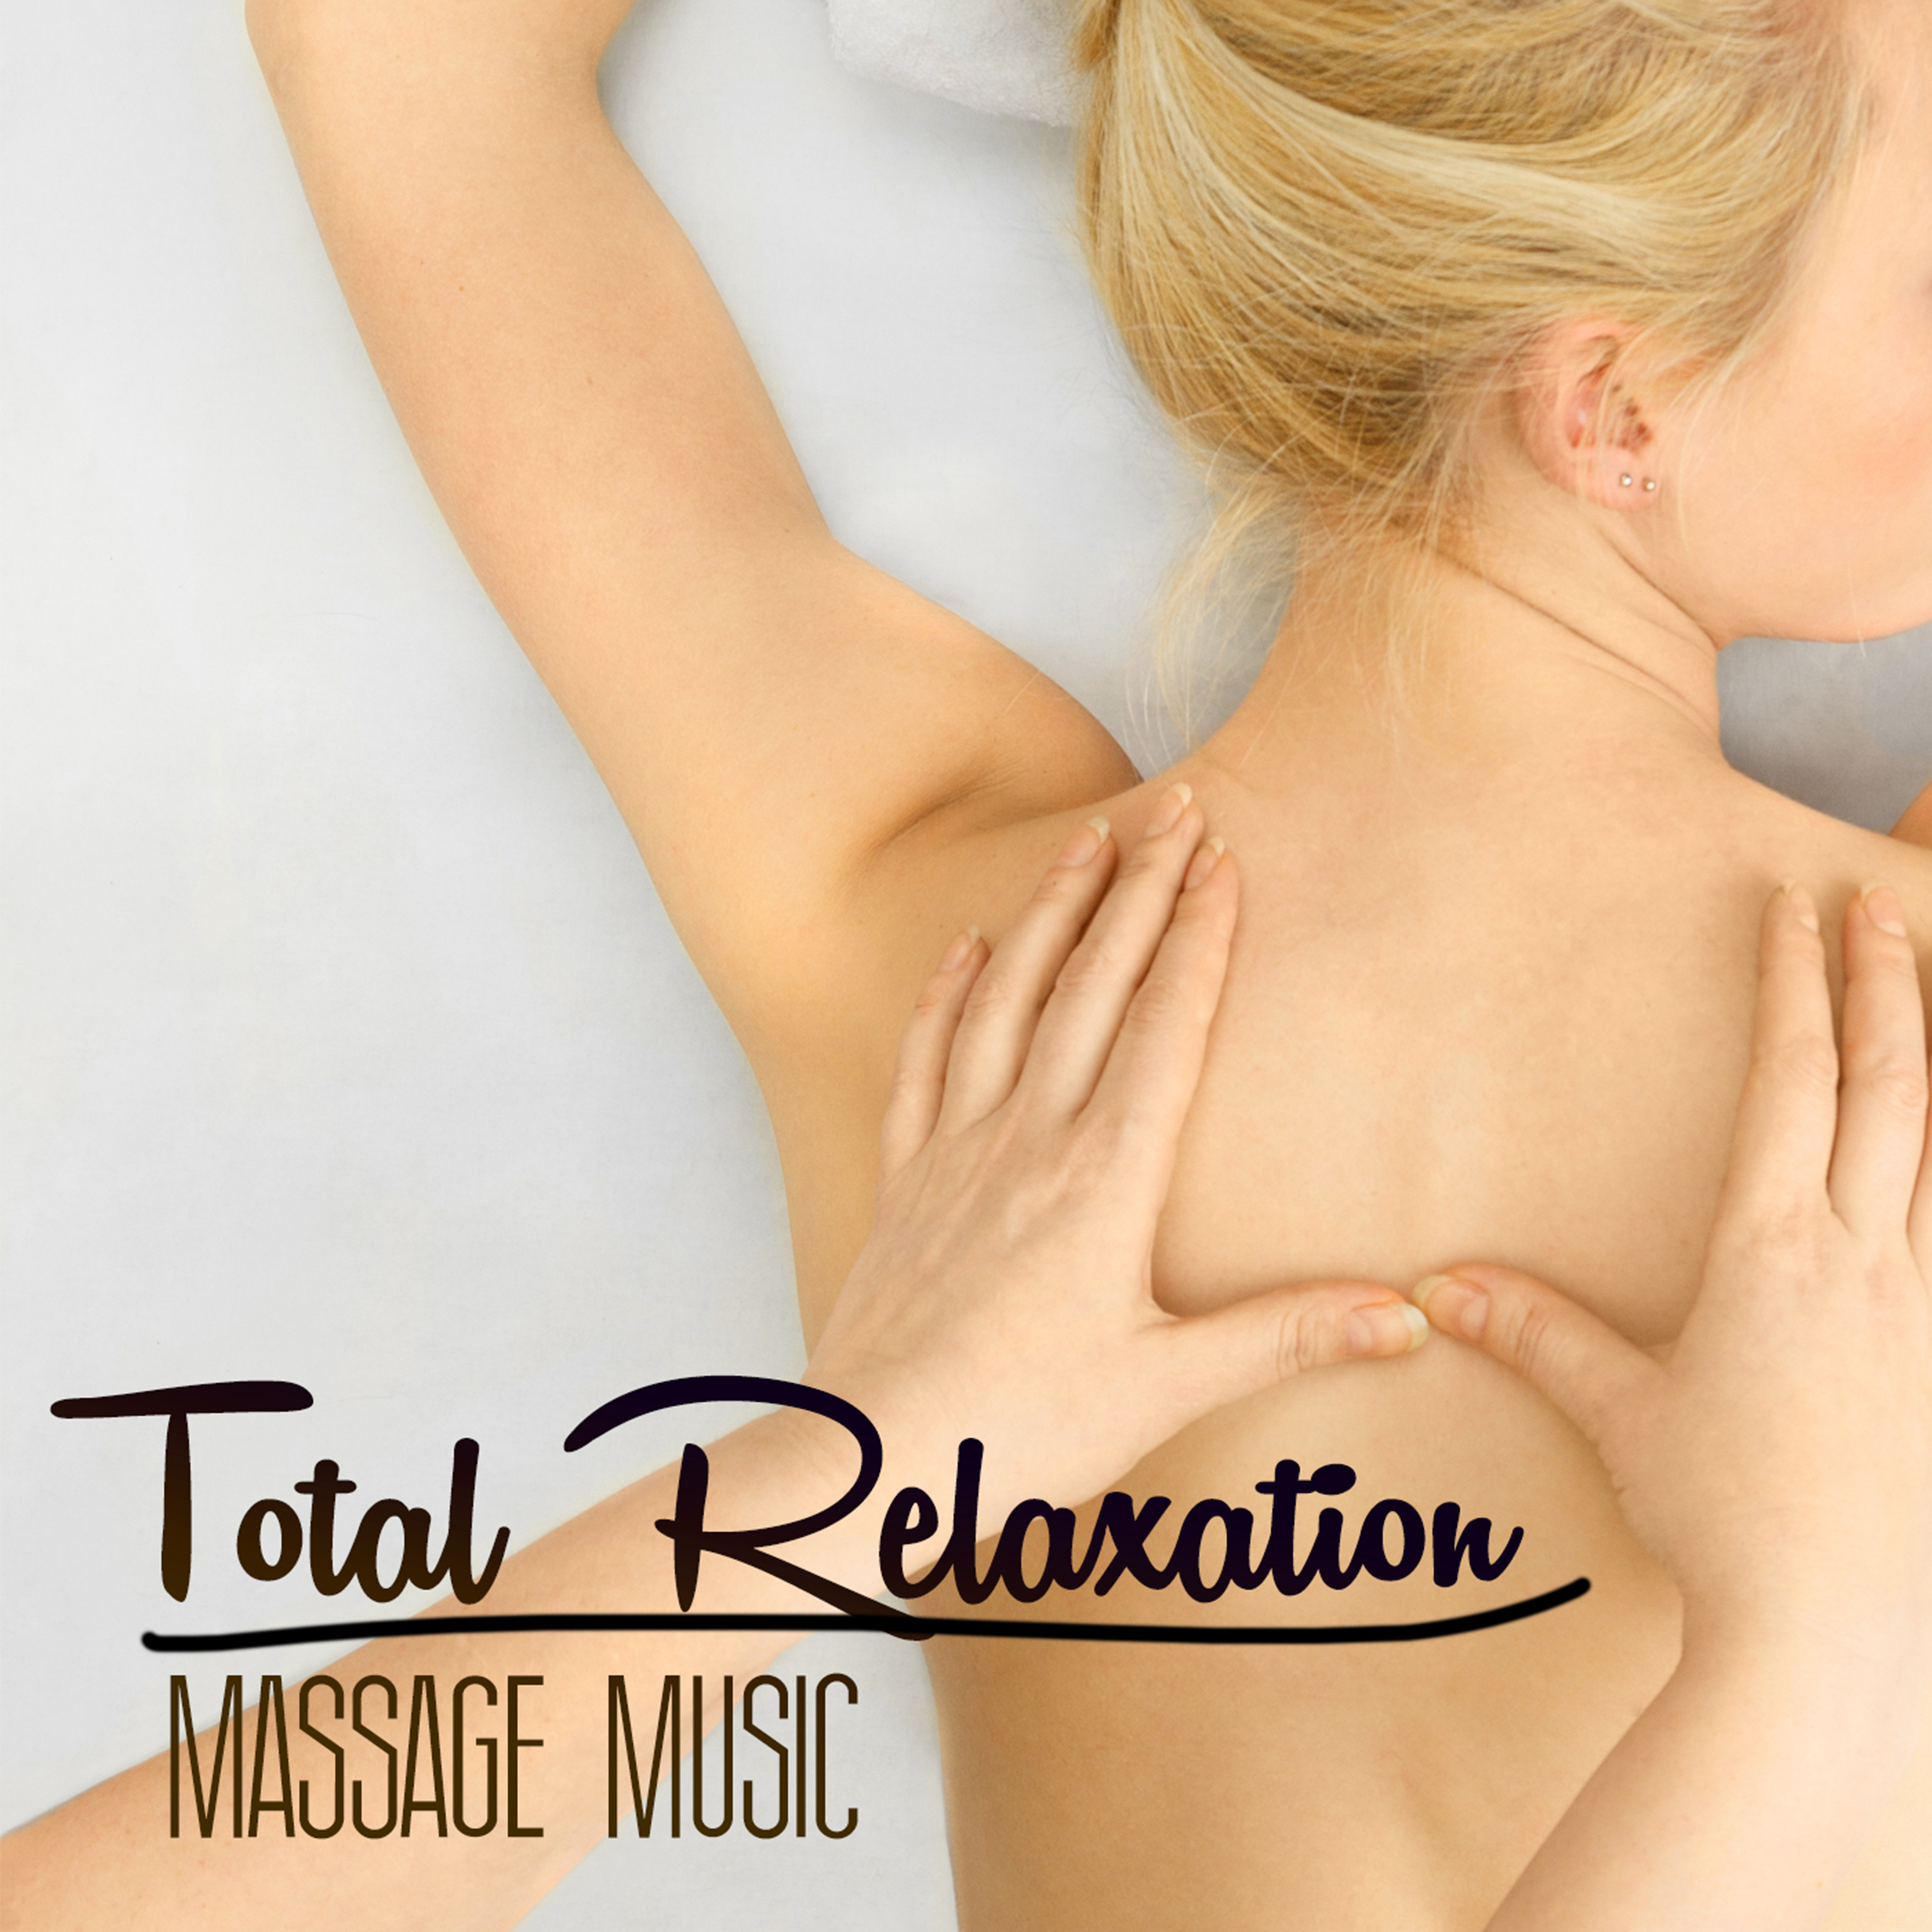 Total Relaxation Massage Music - Relaxing Music for Massage with Gentle Nature Sounds